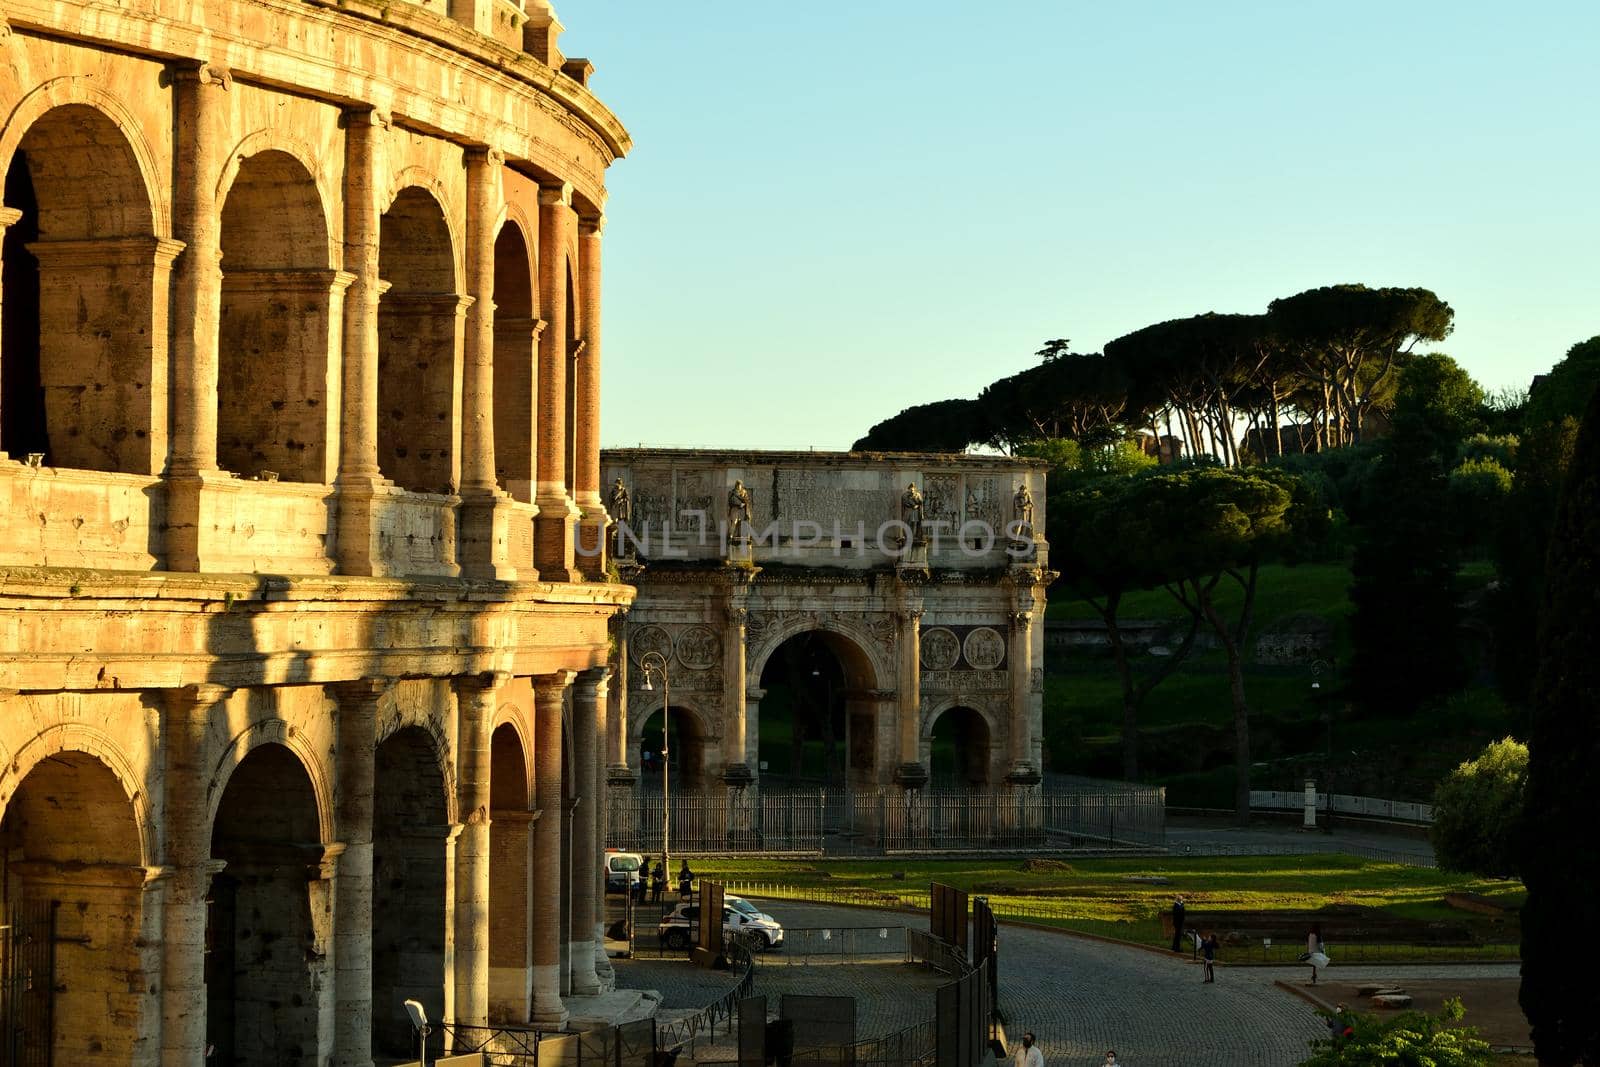 May 7th 2020, Rome, Italy: View of the Colosseum without tourists due to the phase 2 of lockdown